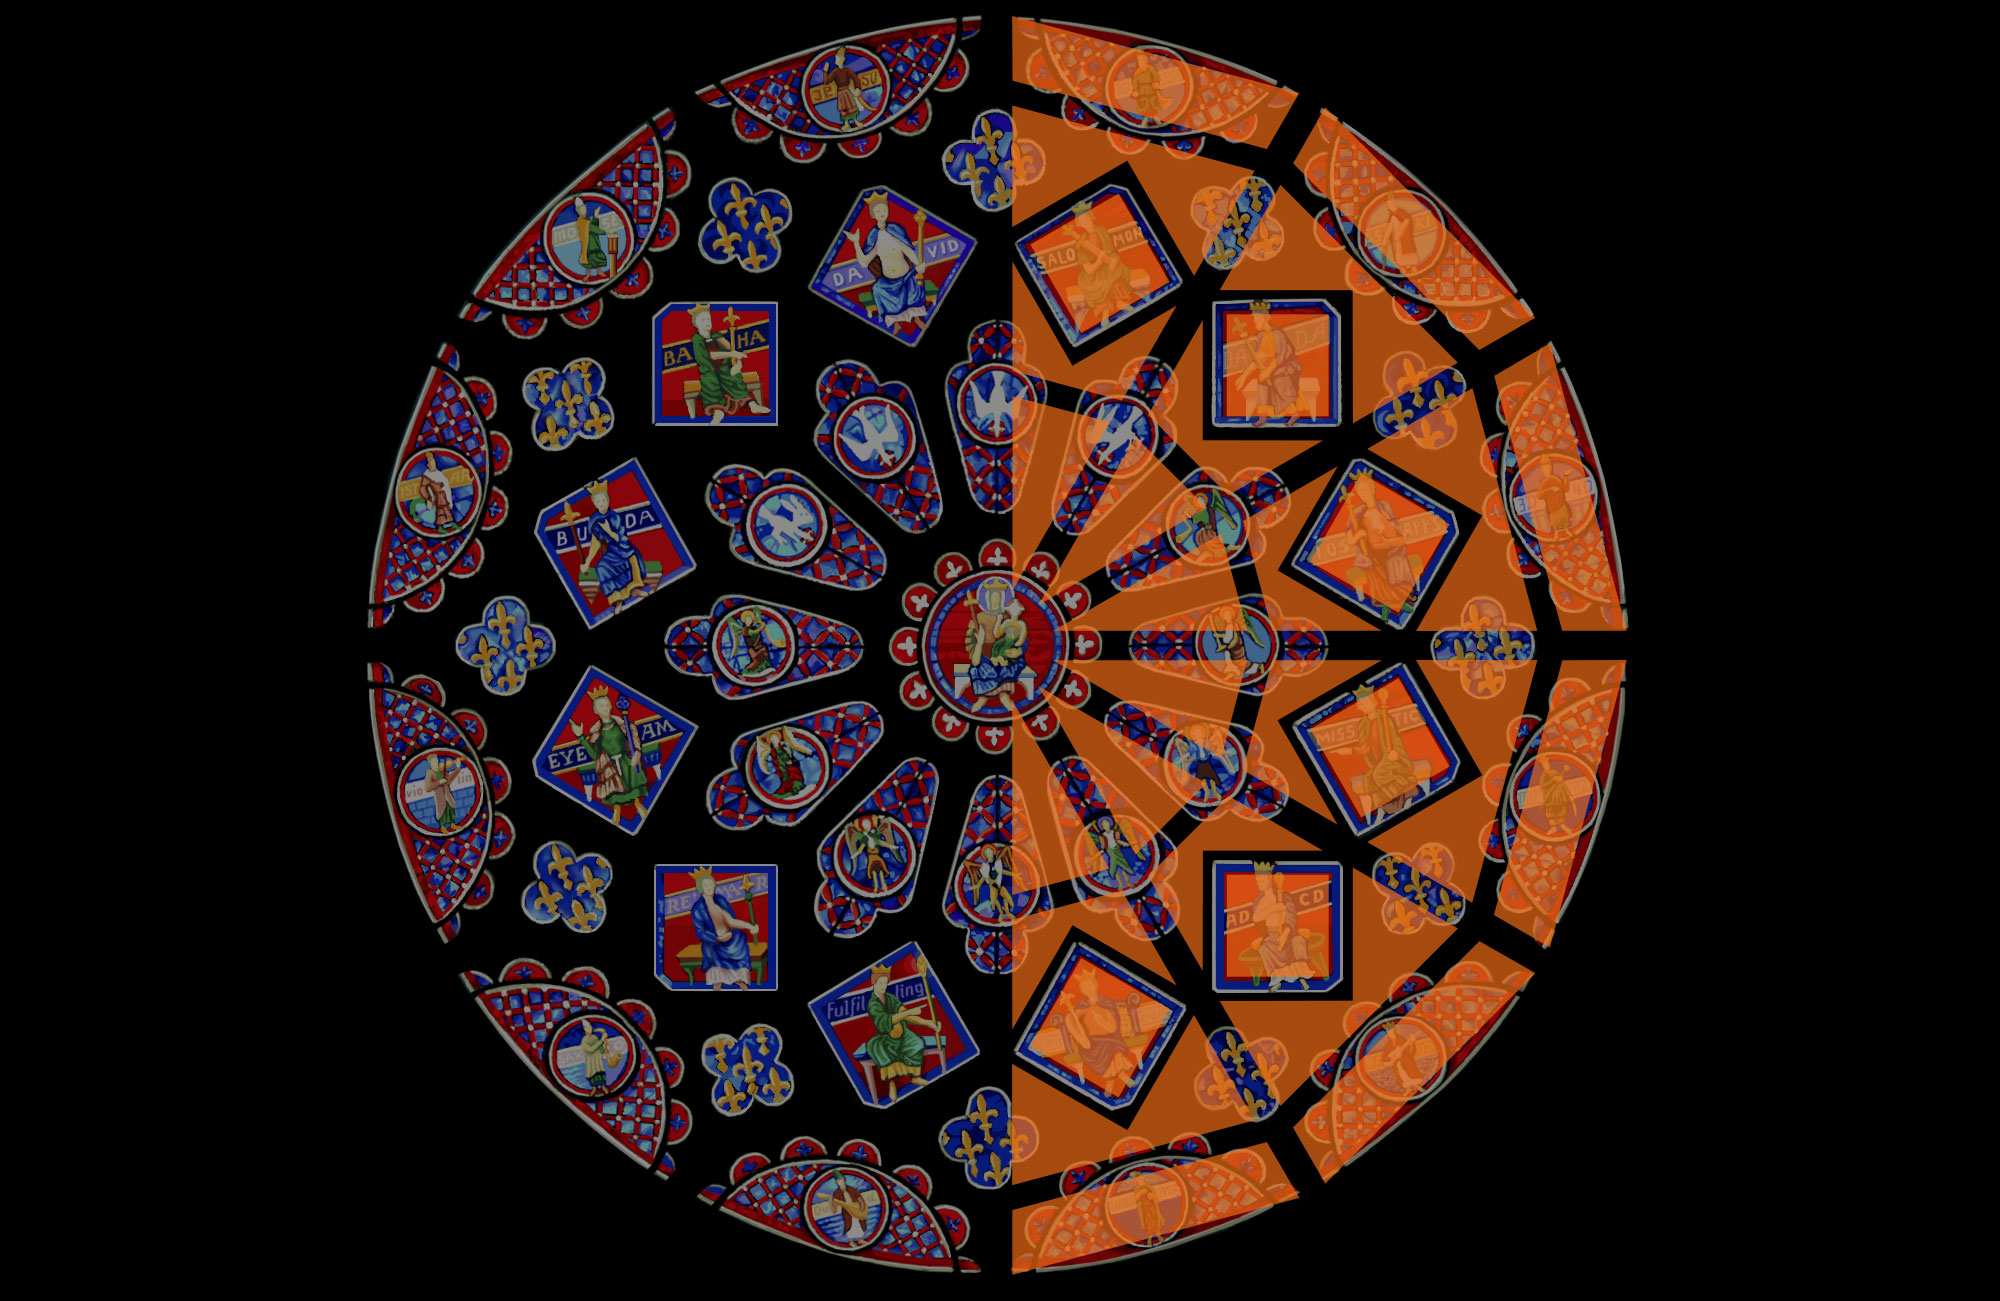 gothic watch face, architecture style, north rose window, chartres cathedral, illustration